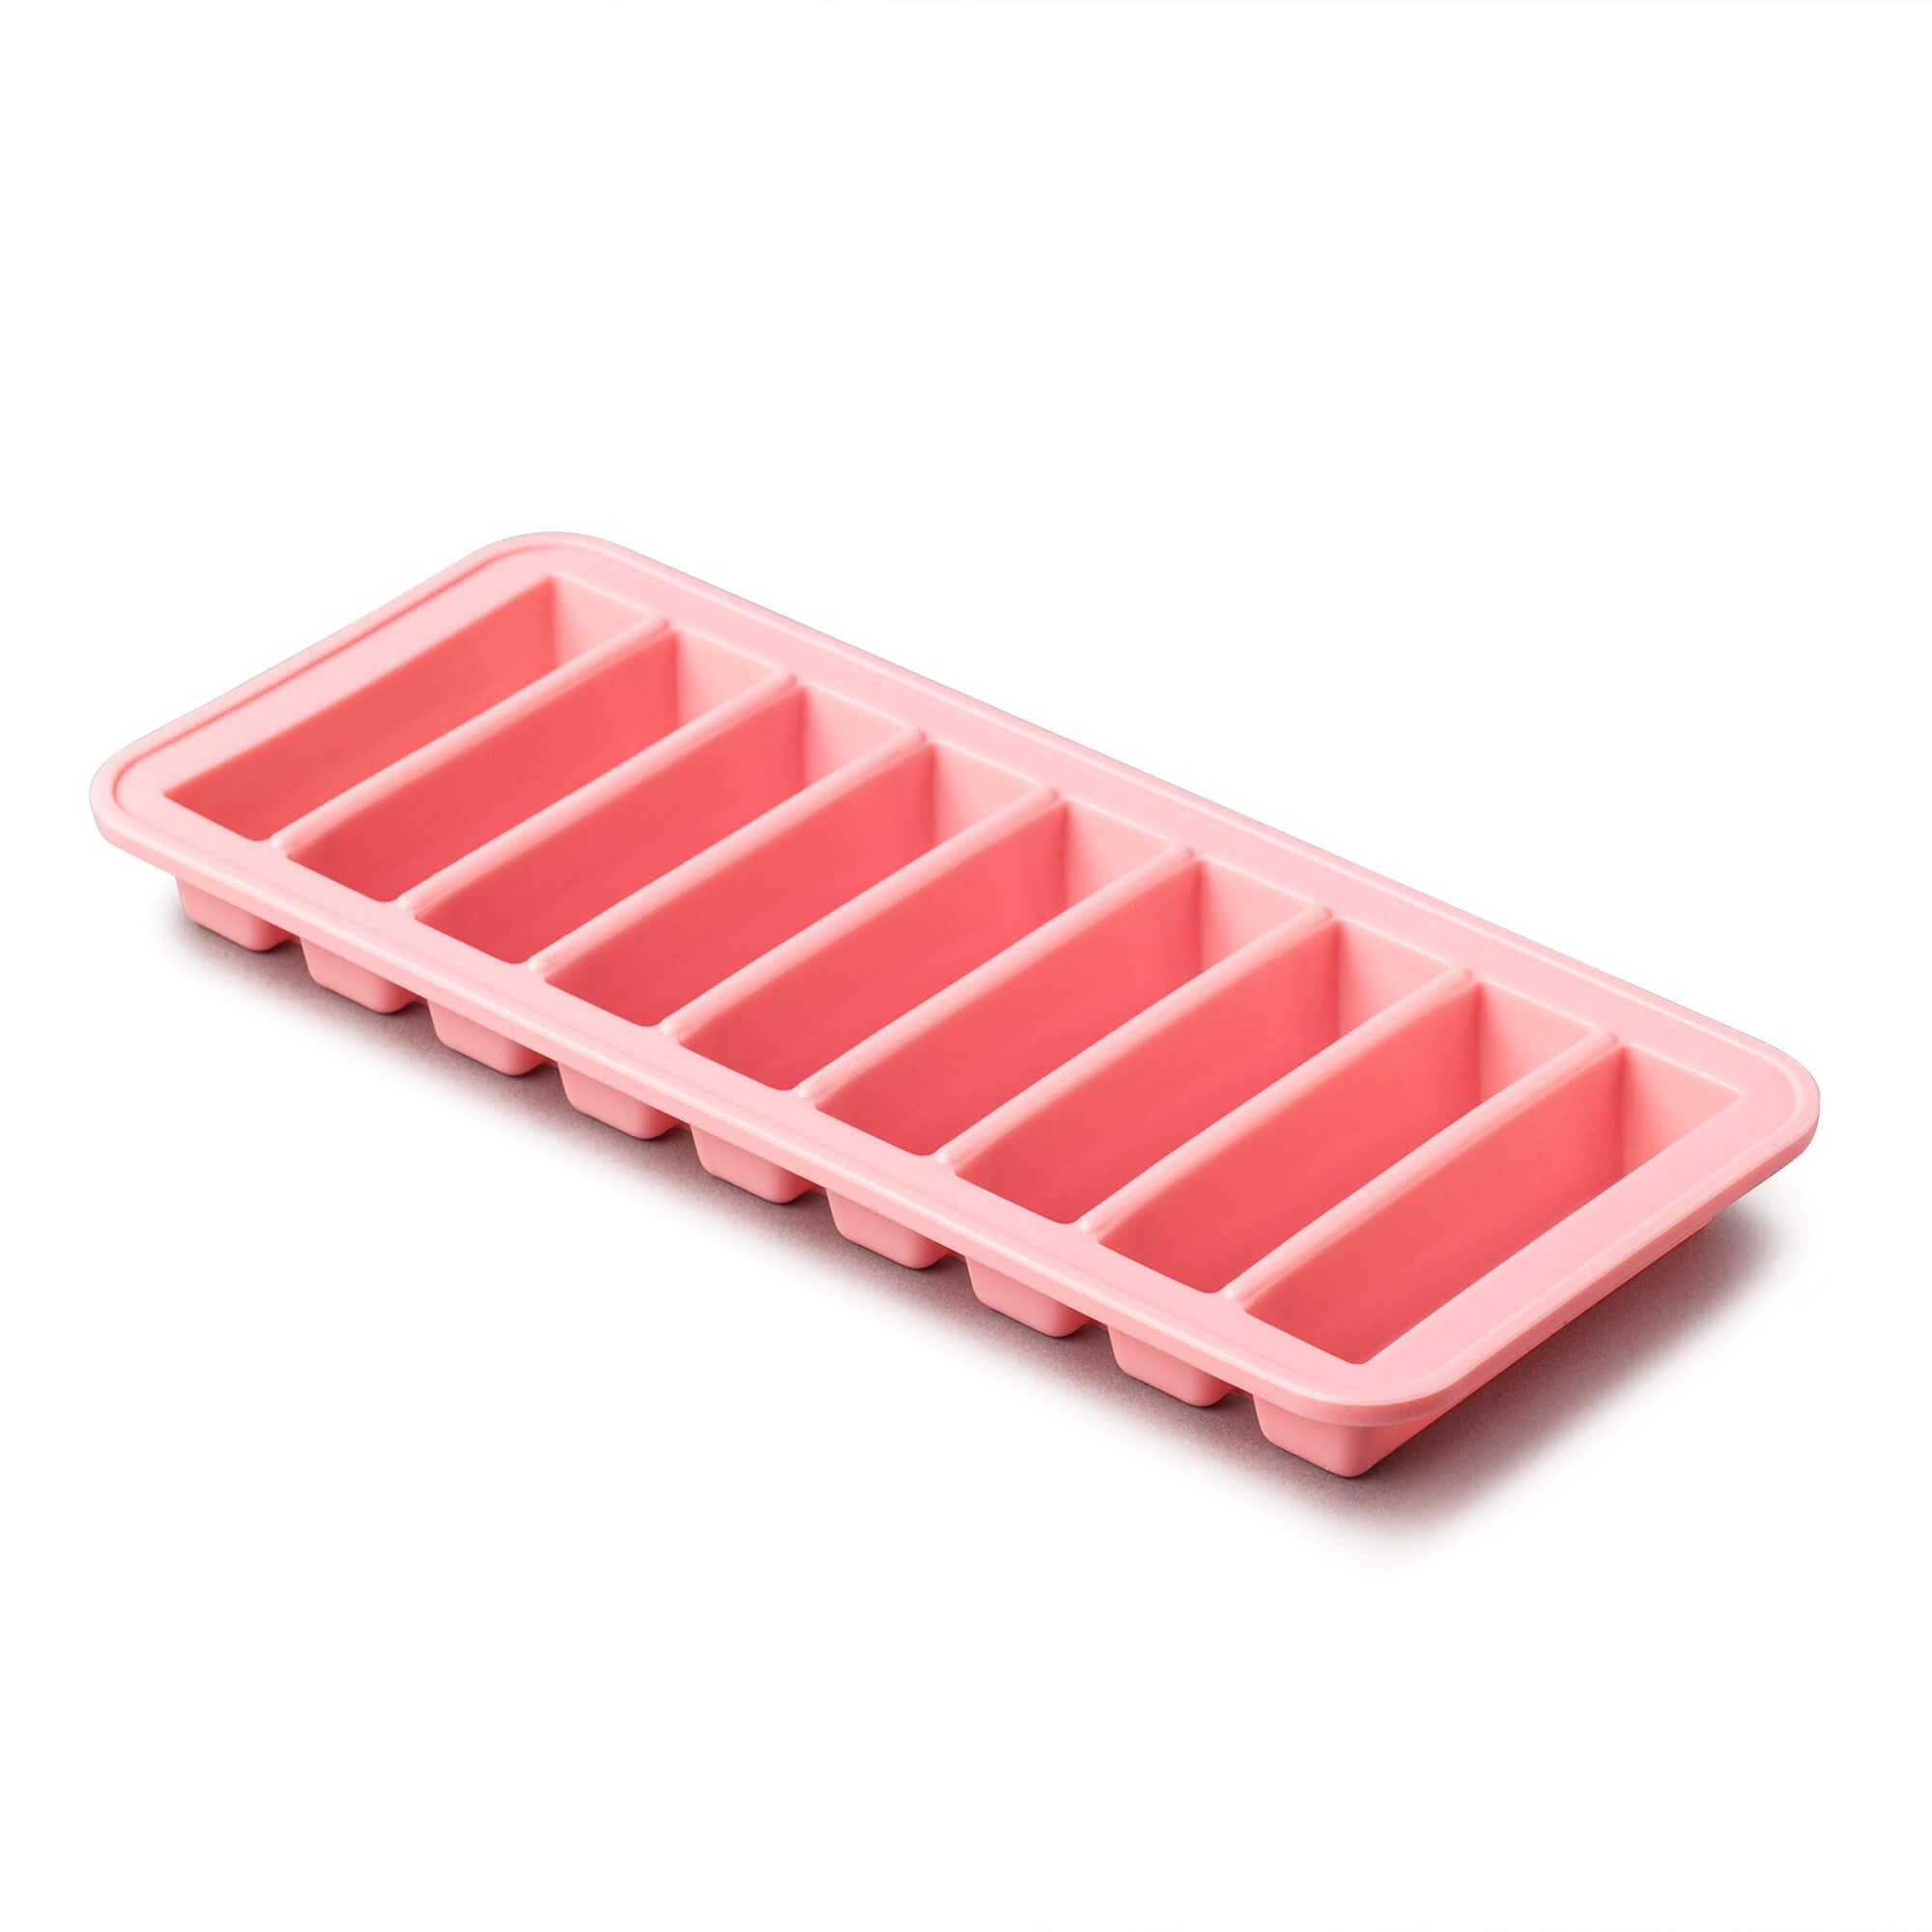 Zeal Silicone Baby Food Freezer Tray in Pink